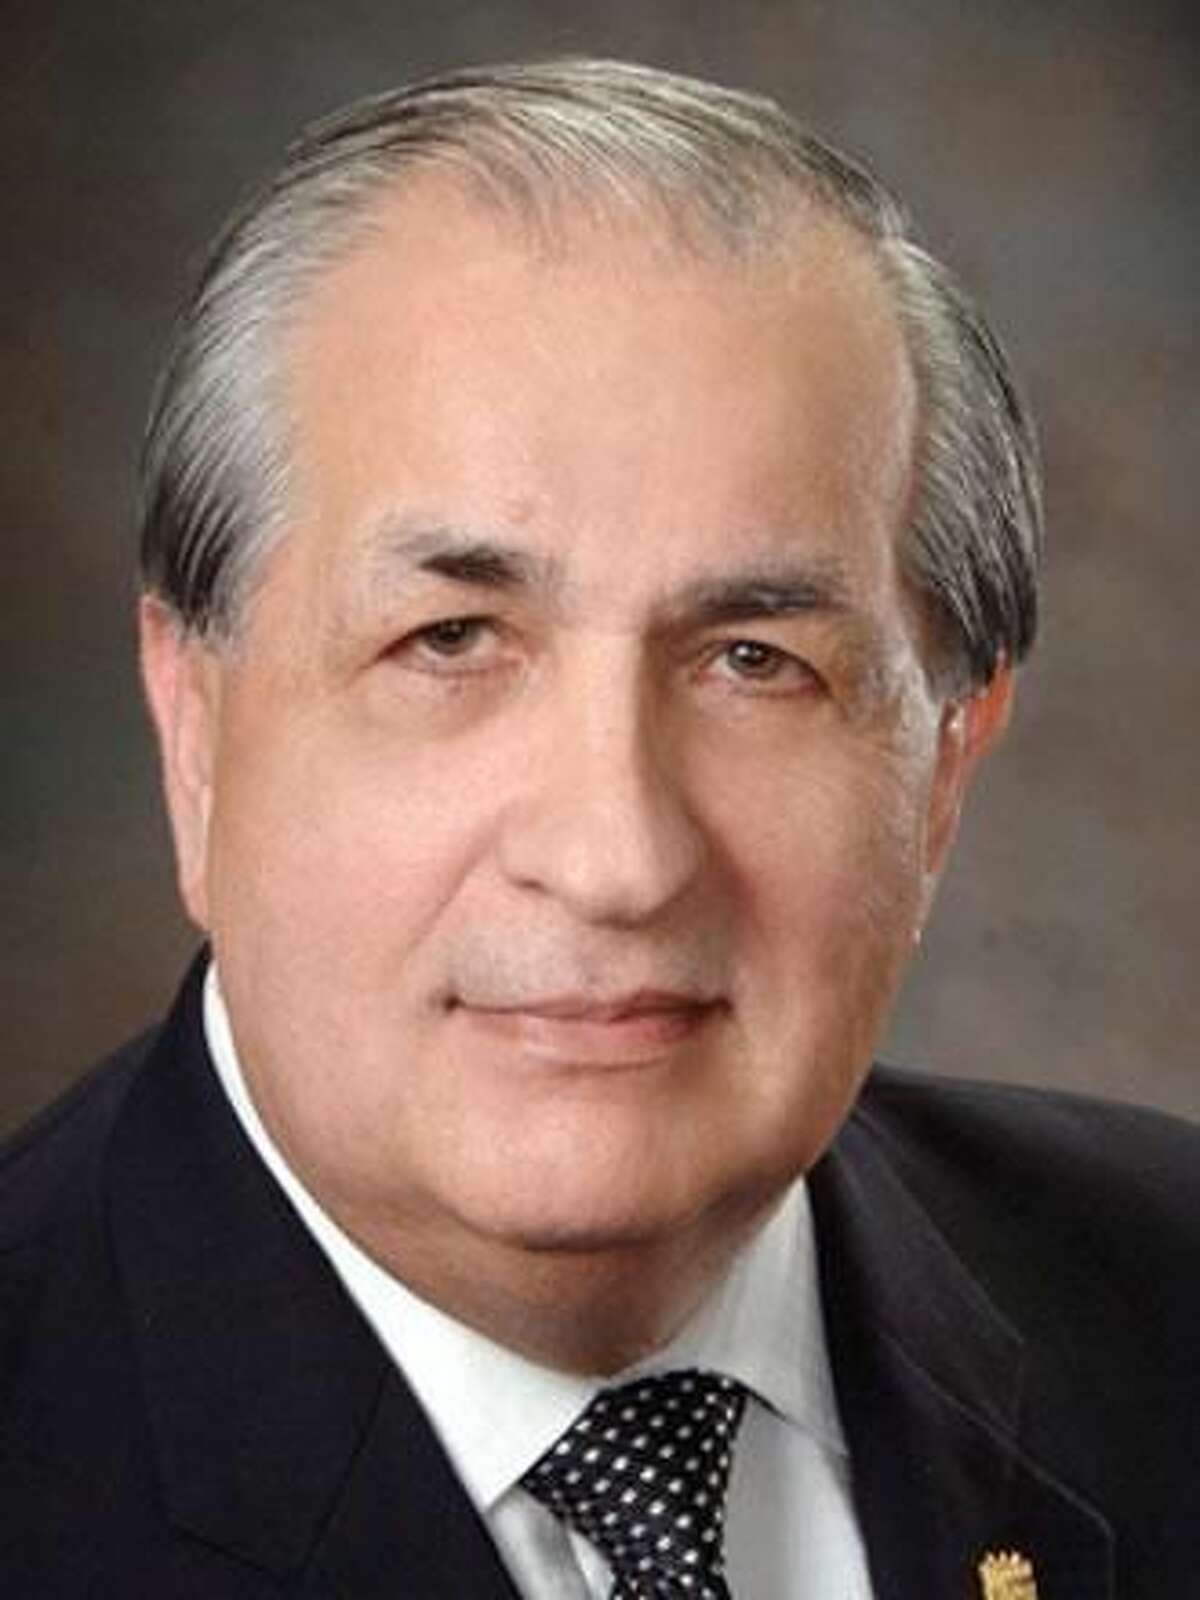 Laredo City Council approved a voluntary retirement agreement with City Manager Carlos Villarreal at its meeting Monday night. His retirement is effective today. Read more about this story: http://bit.ly/1t0PMLE.